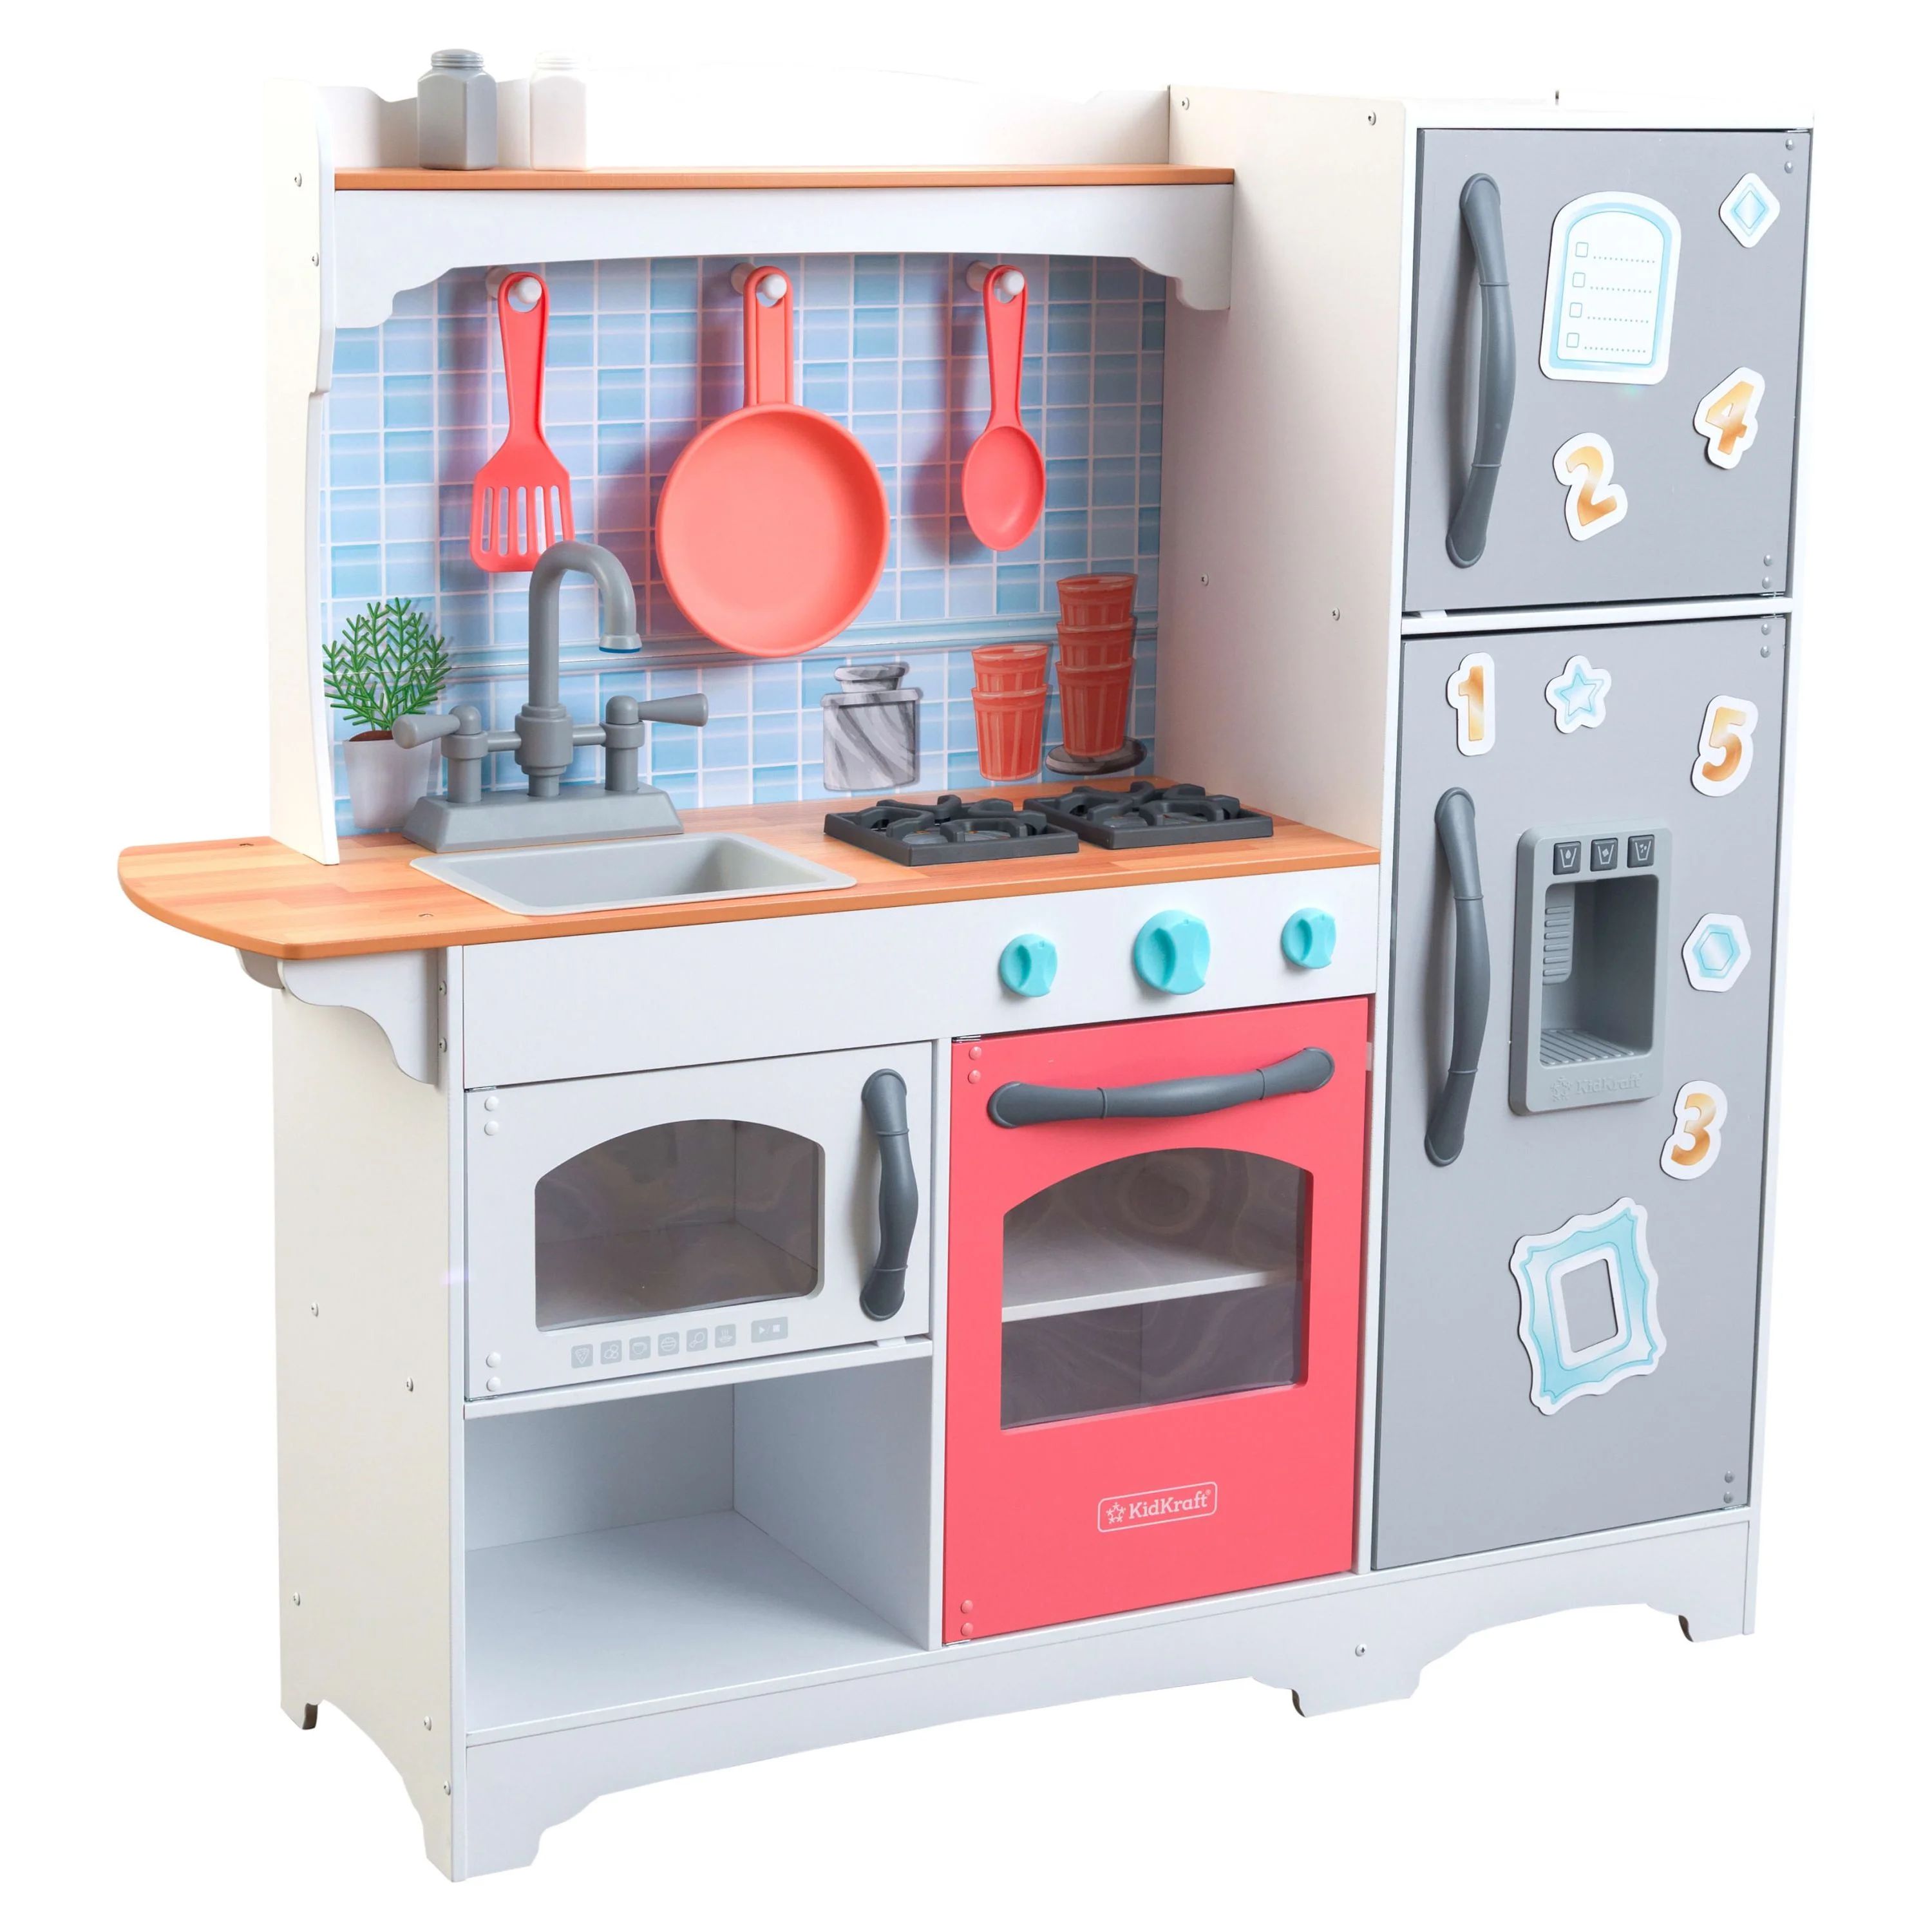 KidKraft Mosaic Magnetic Play Kitchen for Kids, Gray and Pink | Walmart (US)